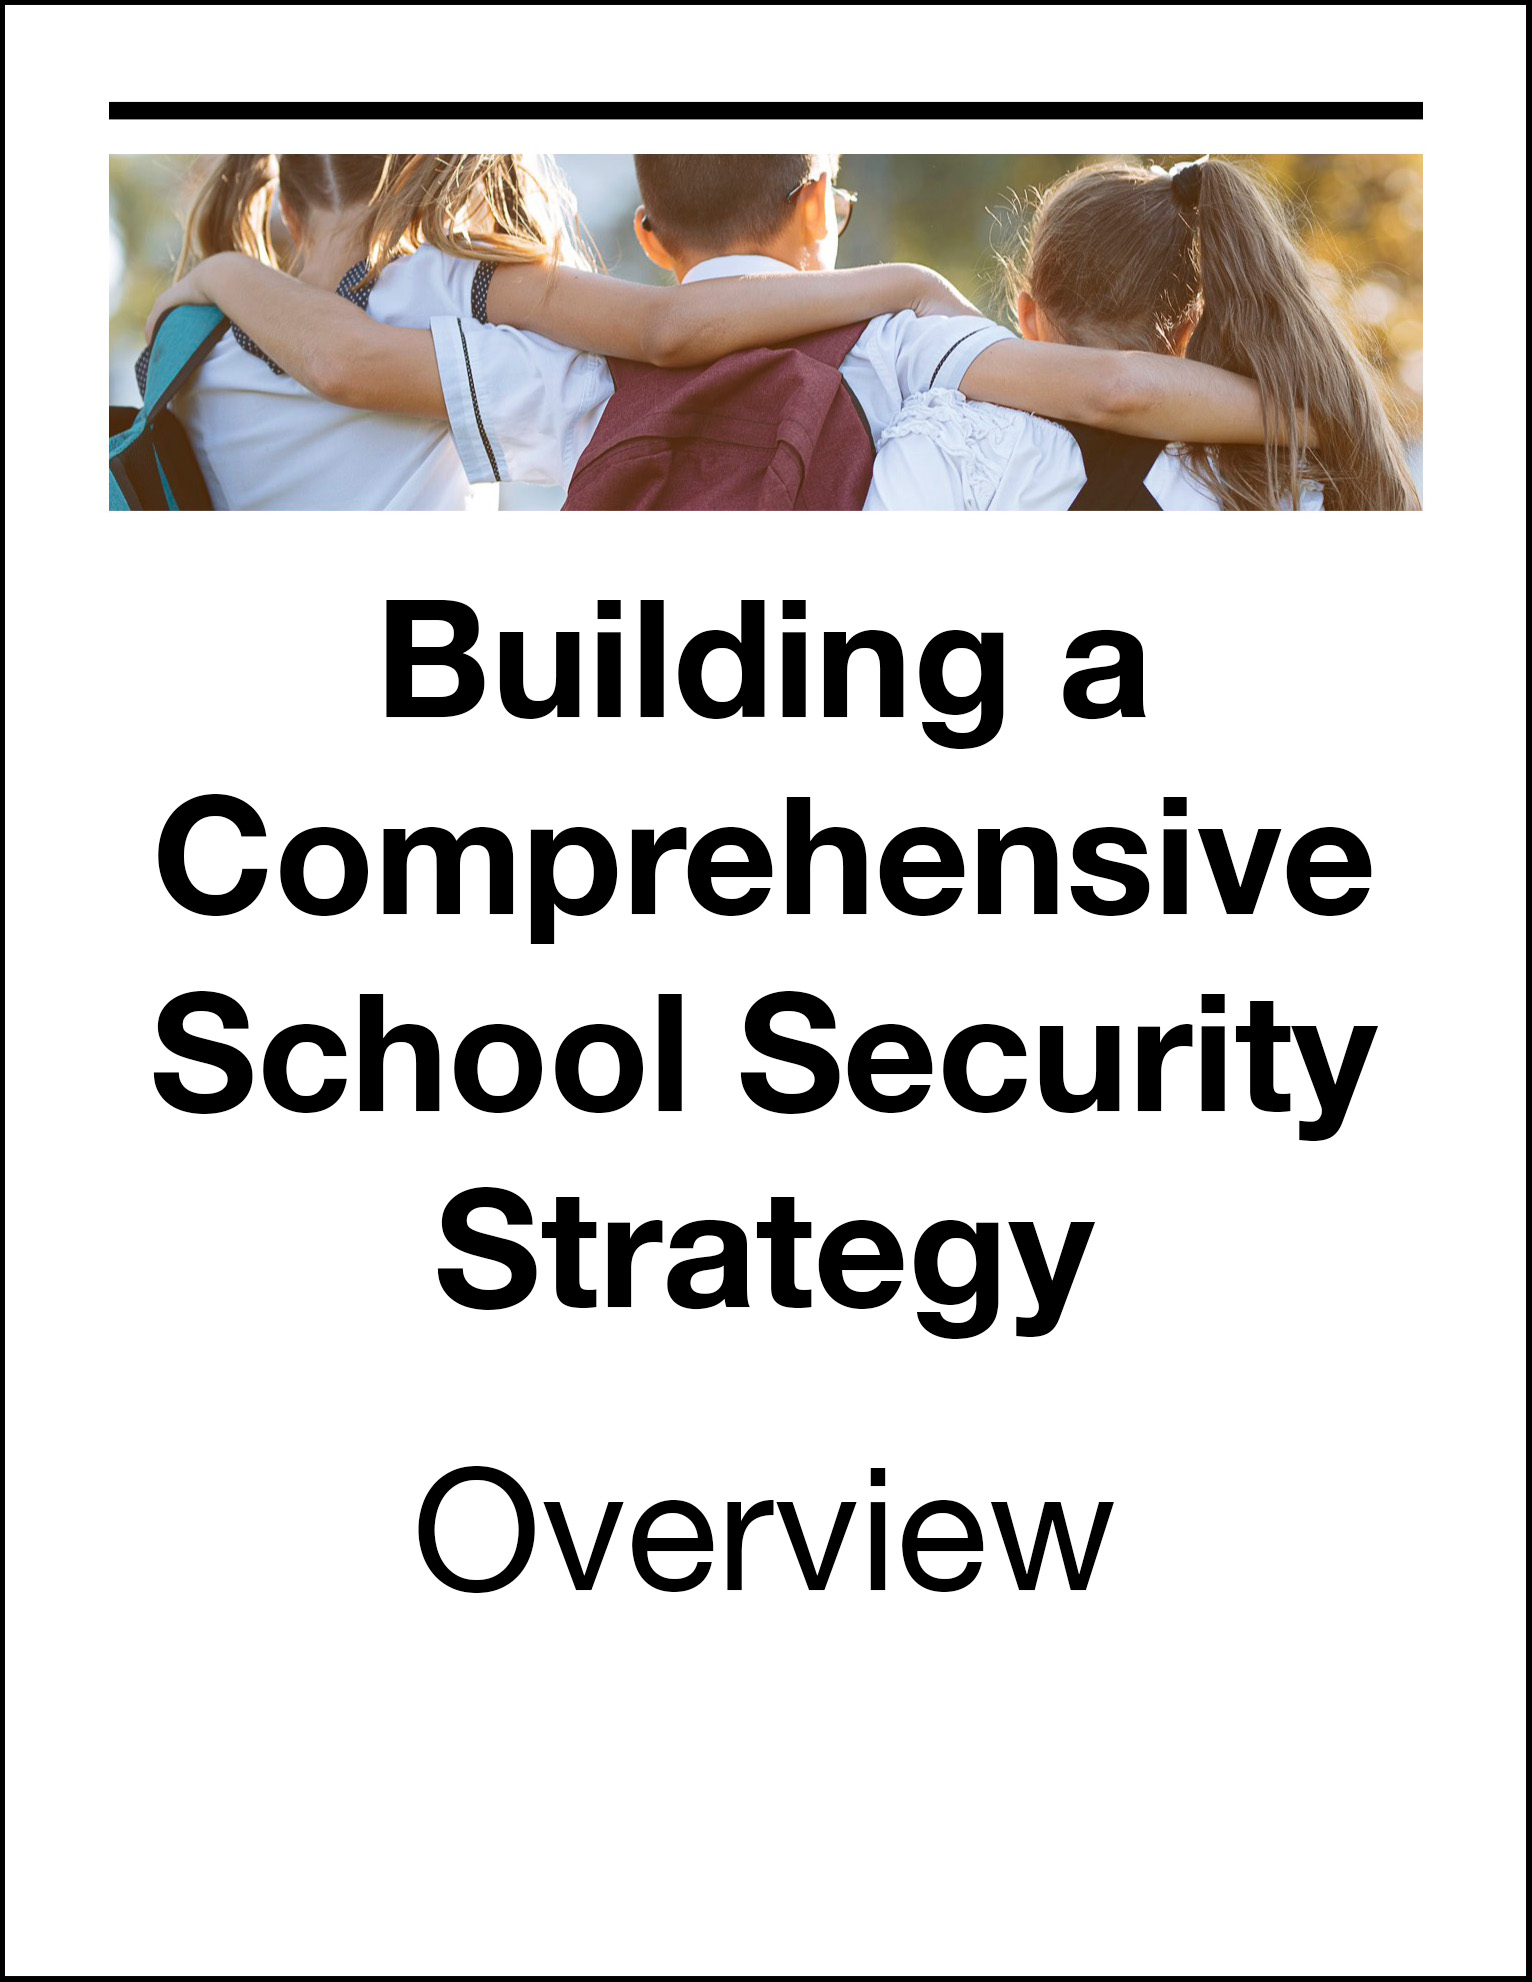 Comphrehensive School Security Strategy